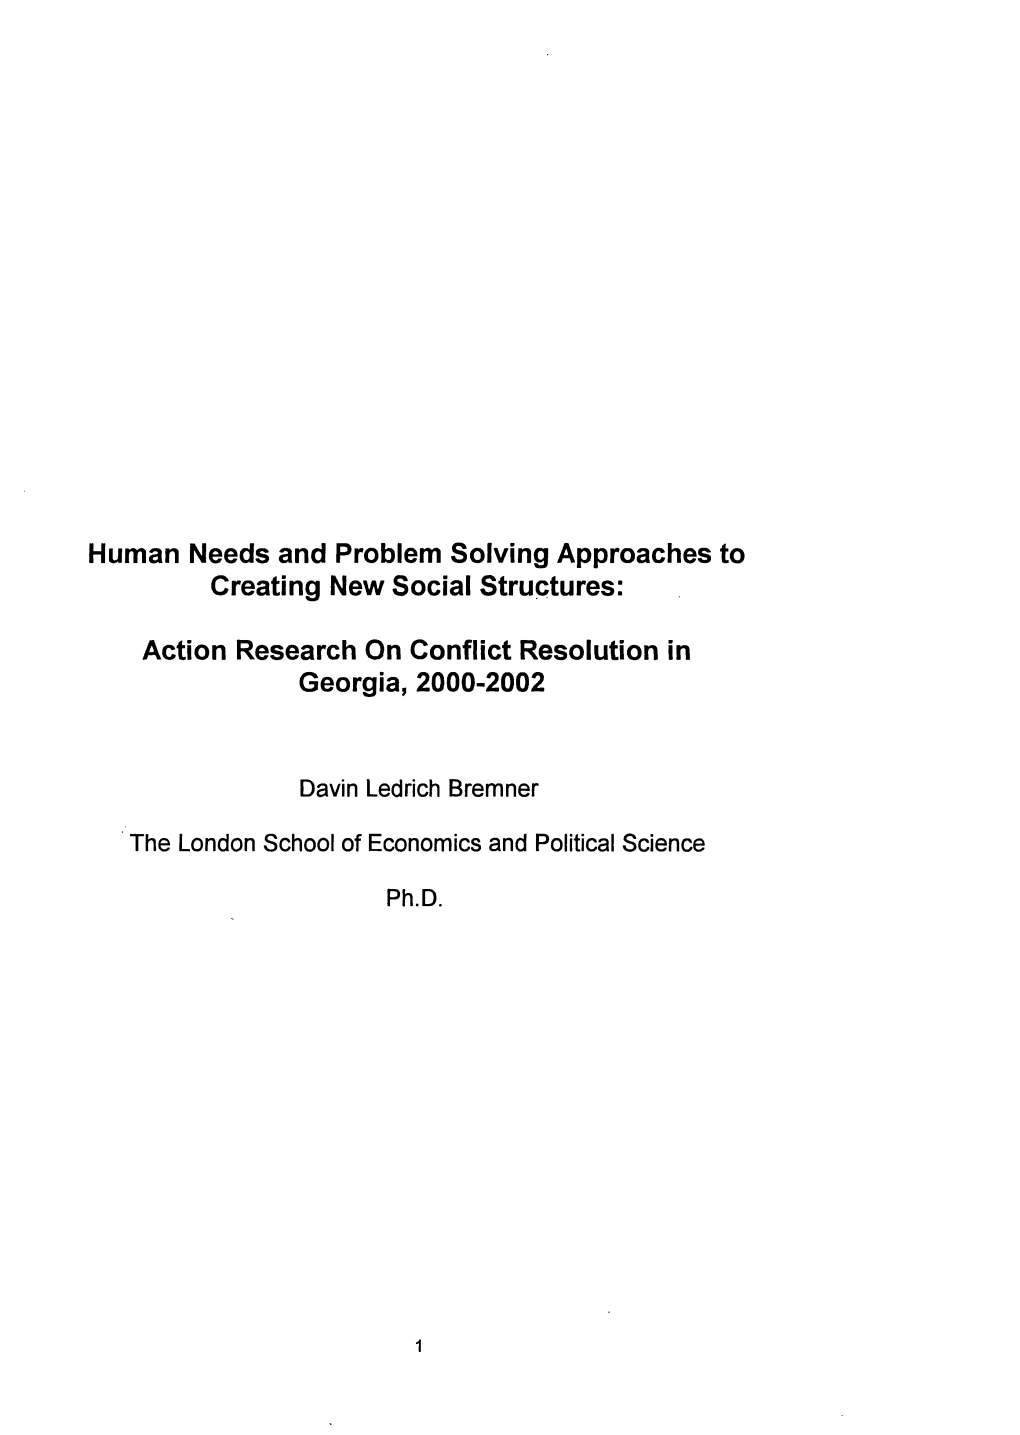 Human Needs and Problem Solving Approaches to Creating New Social Structures: Action Research on Conflict Resolution in Georgia